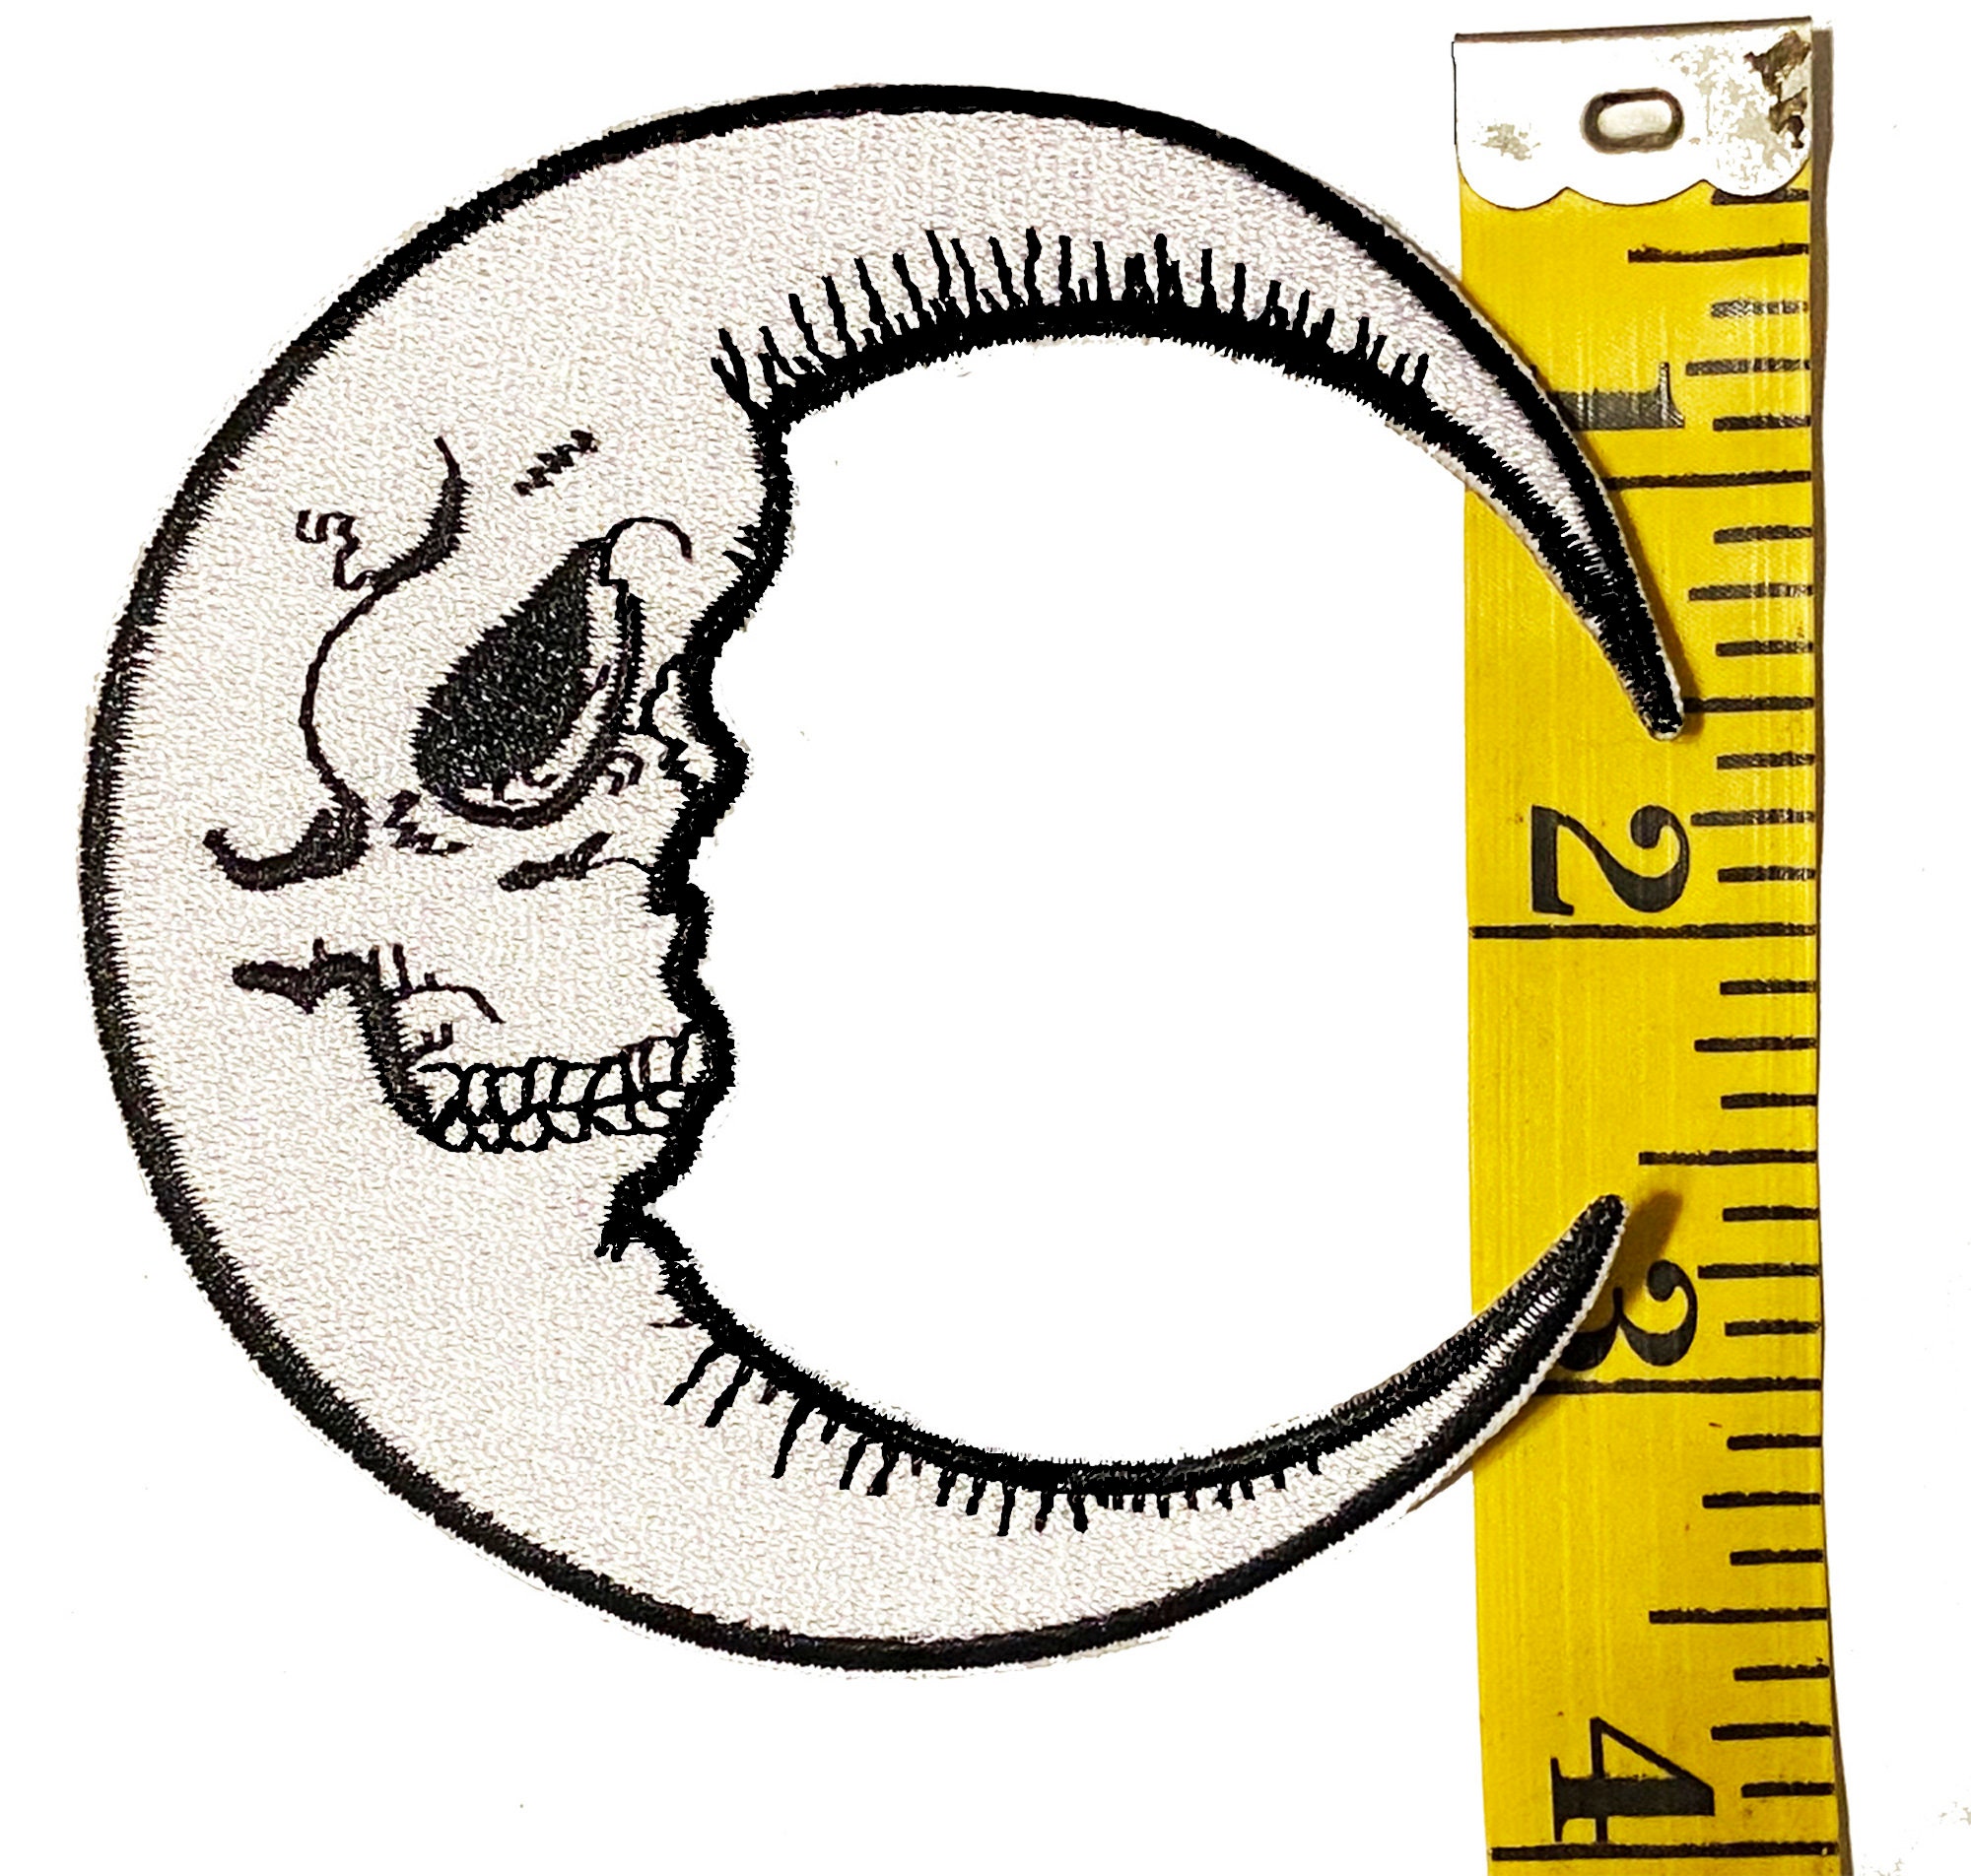 Skull Patch, Iron on Patch, Embroidered Clothes Patches, New Patch, Biker  Patch, Motorcycle Pach, Vest Patch, Jacket Patch, Cool Patch 